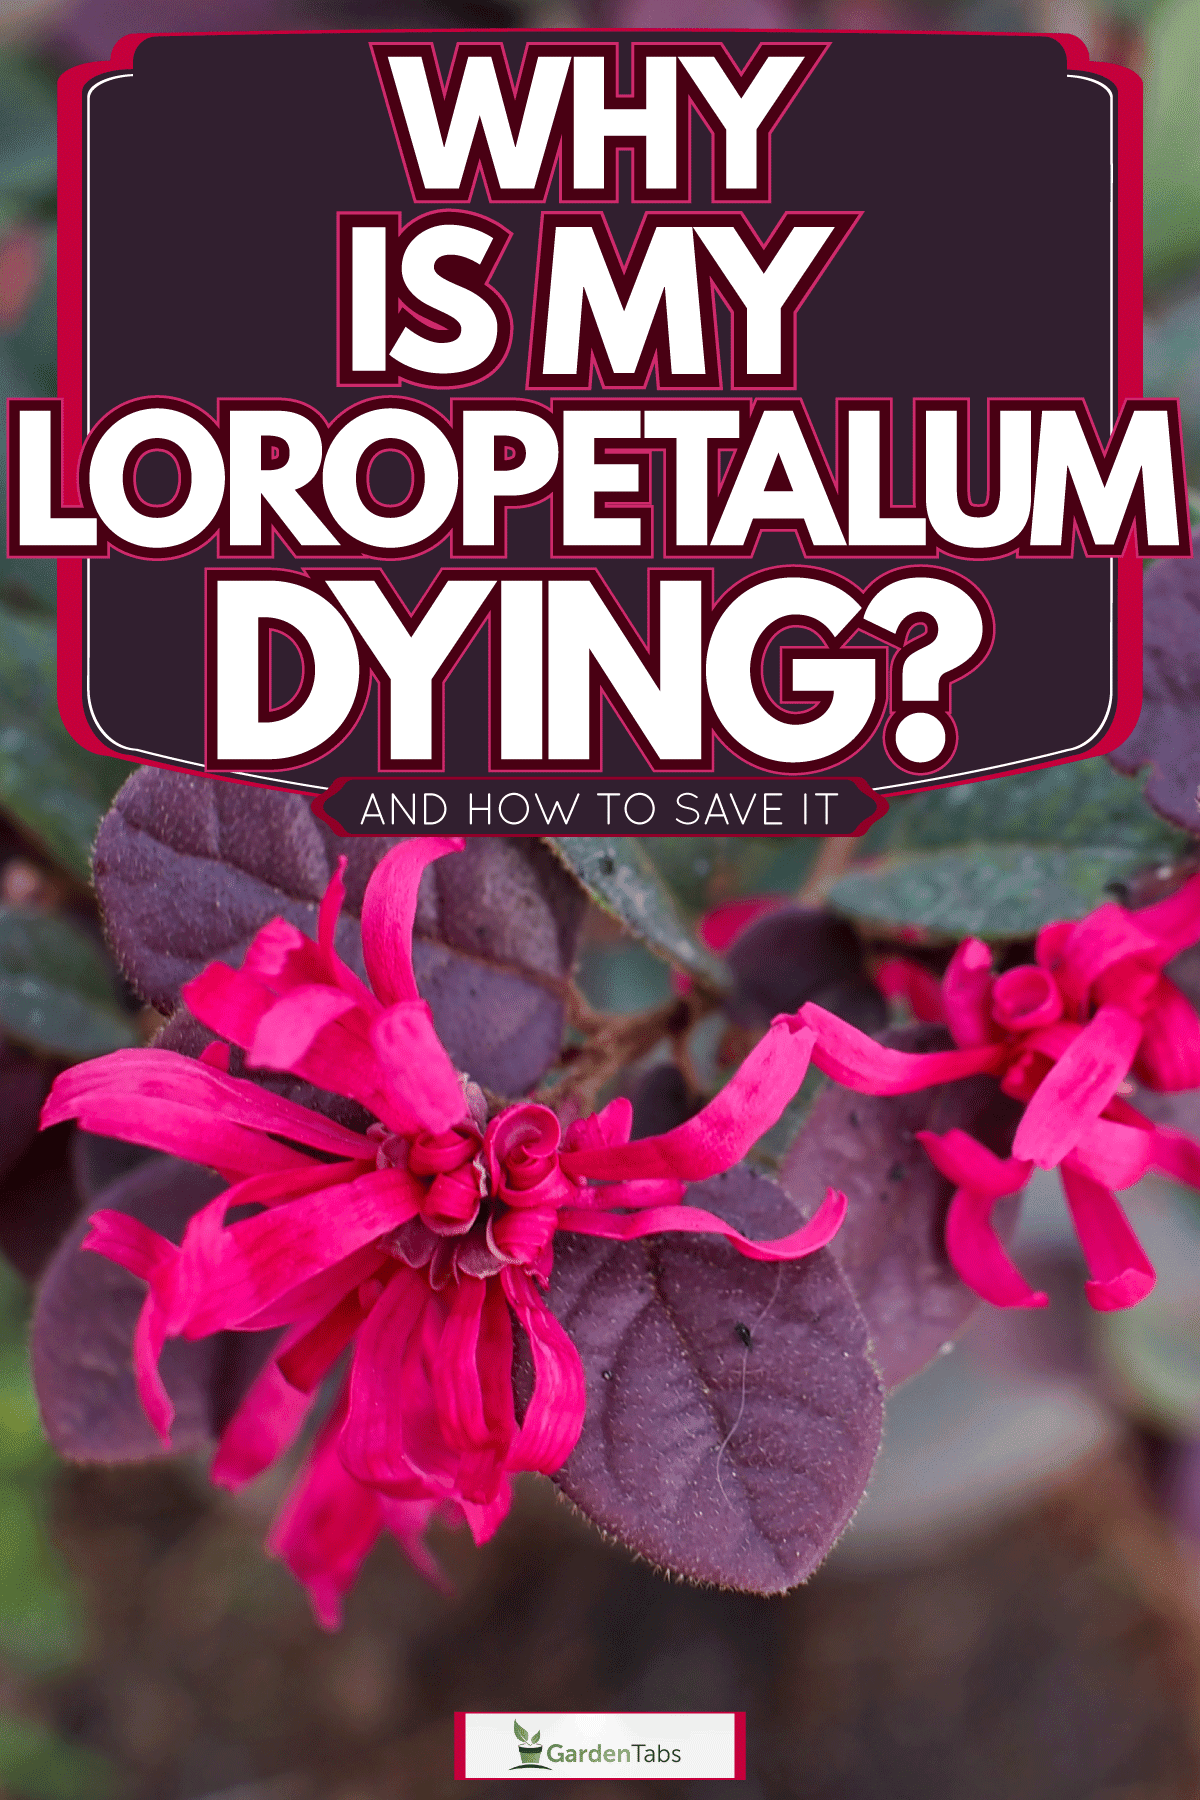 The blooming red petals of a Loropetalum flower photographed up close, Why Is My Loropetalum Dying? [And How To Save It]